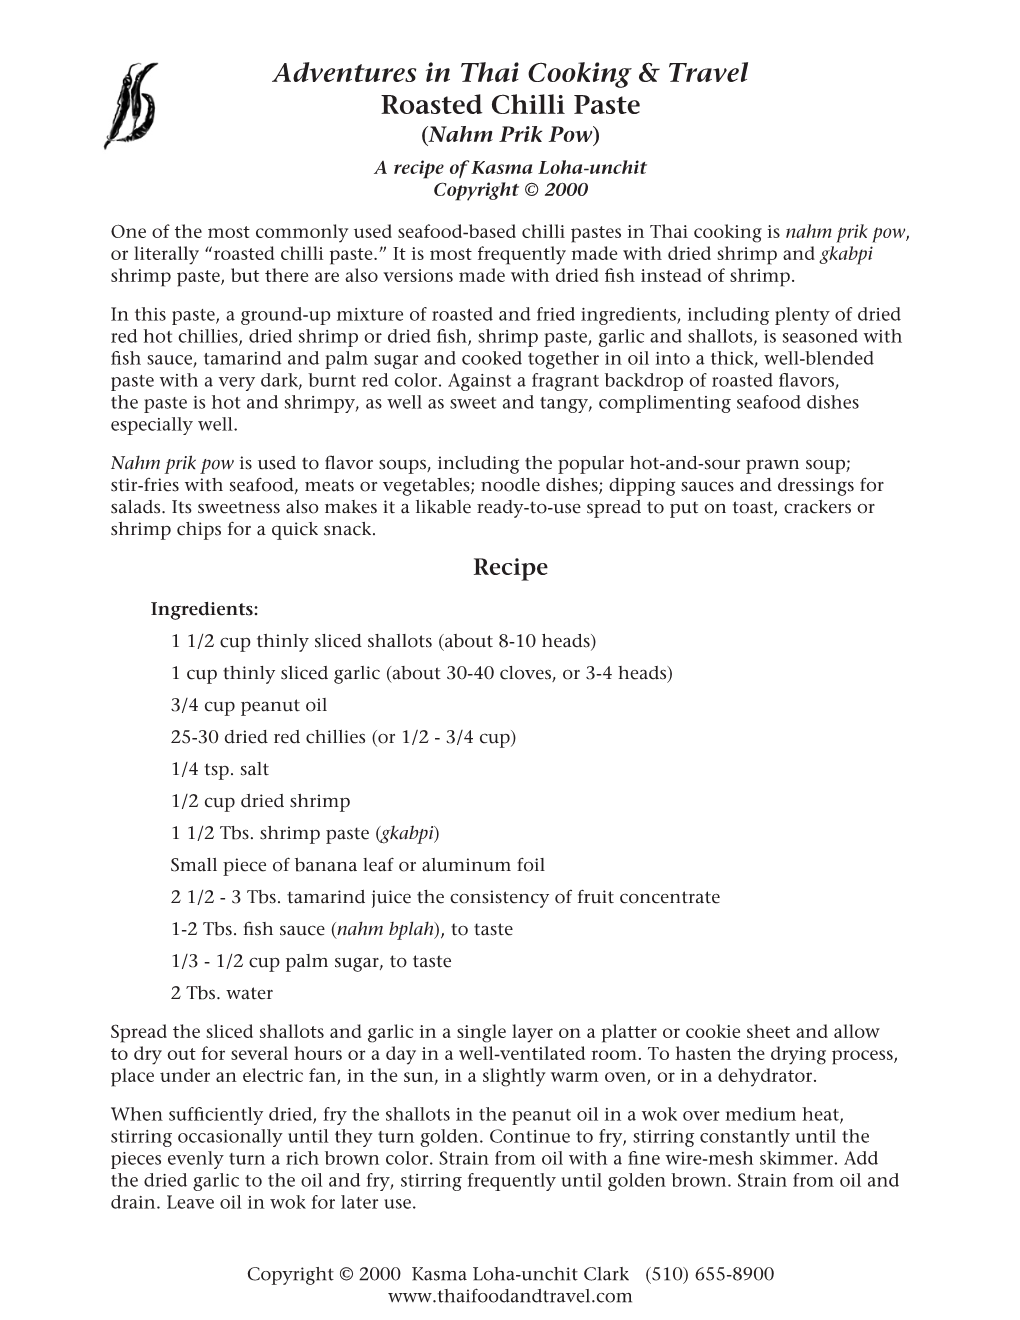 Reasted Chilli Paste Recipe in PDF Format